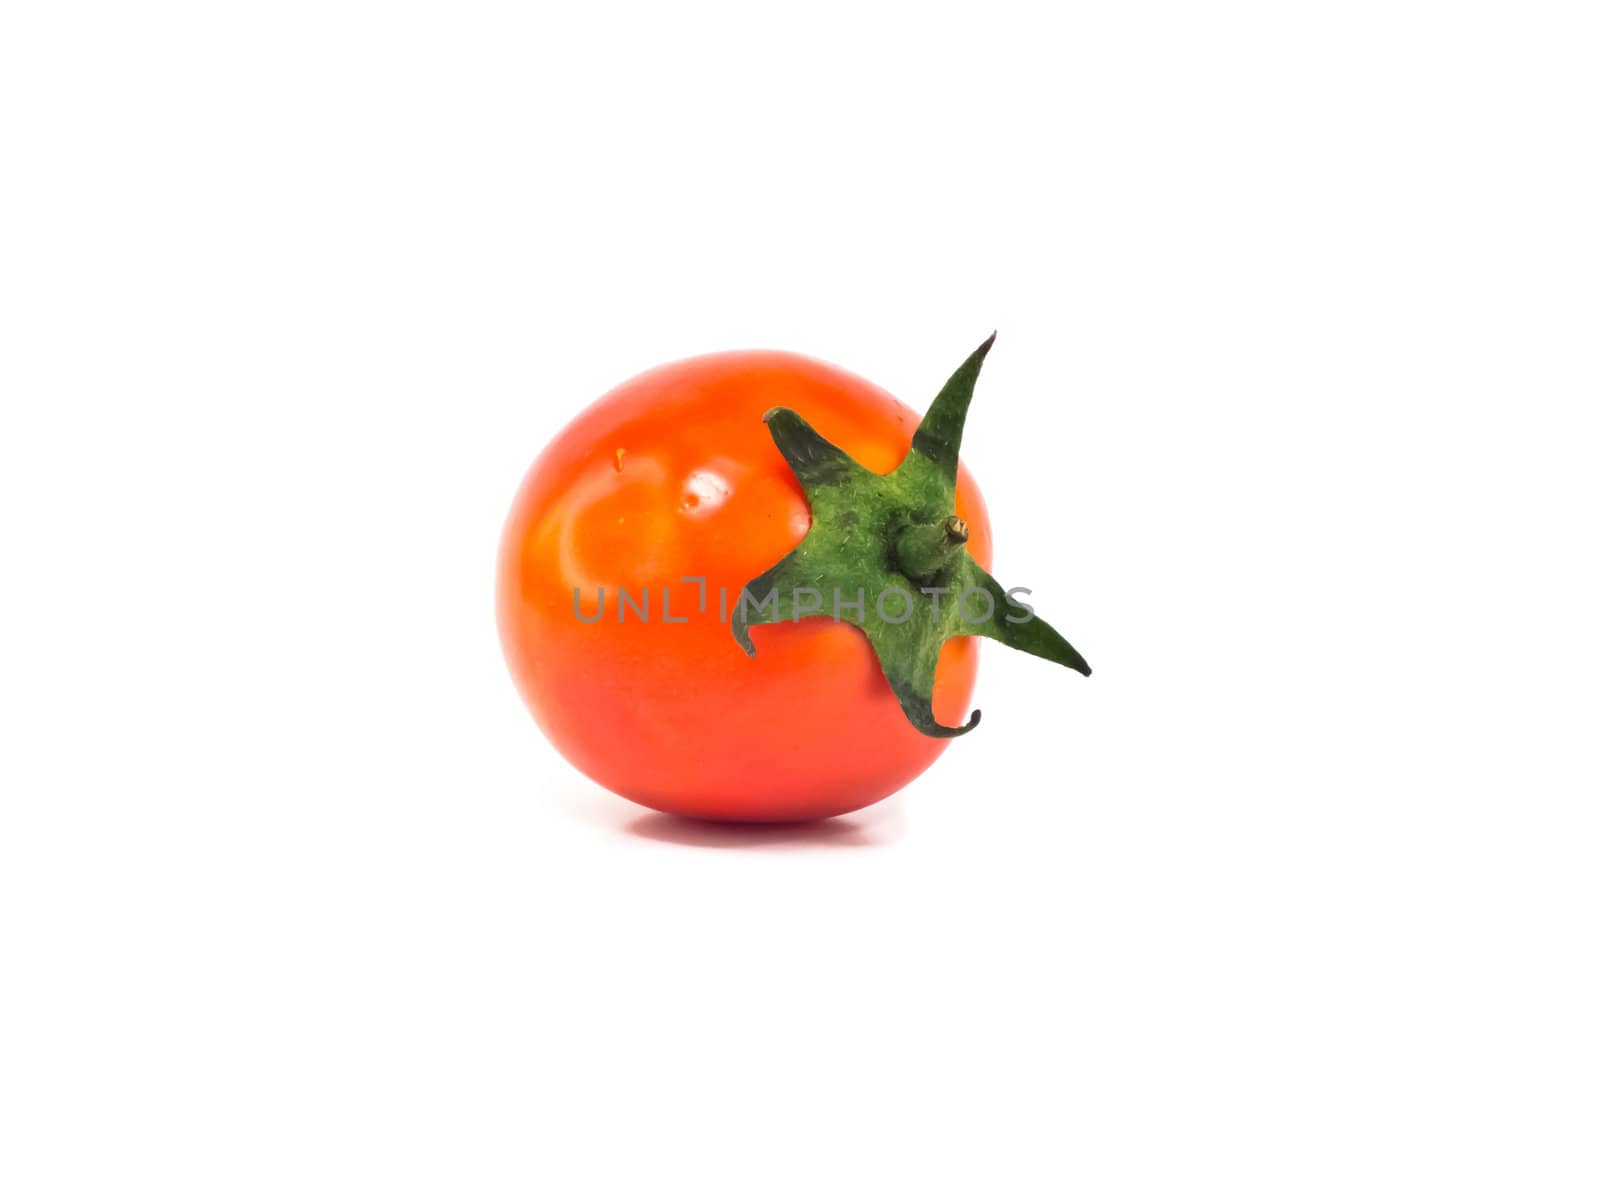 This is a tomato sde view on white background